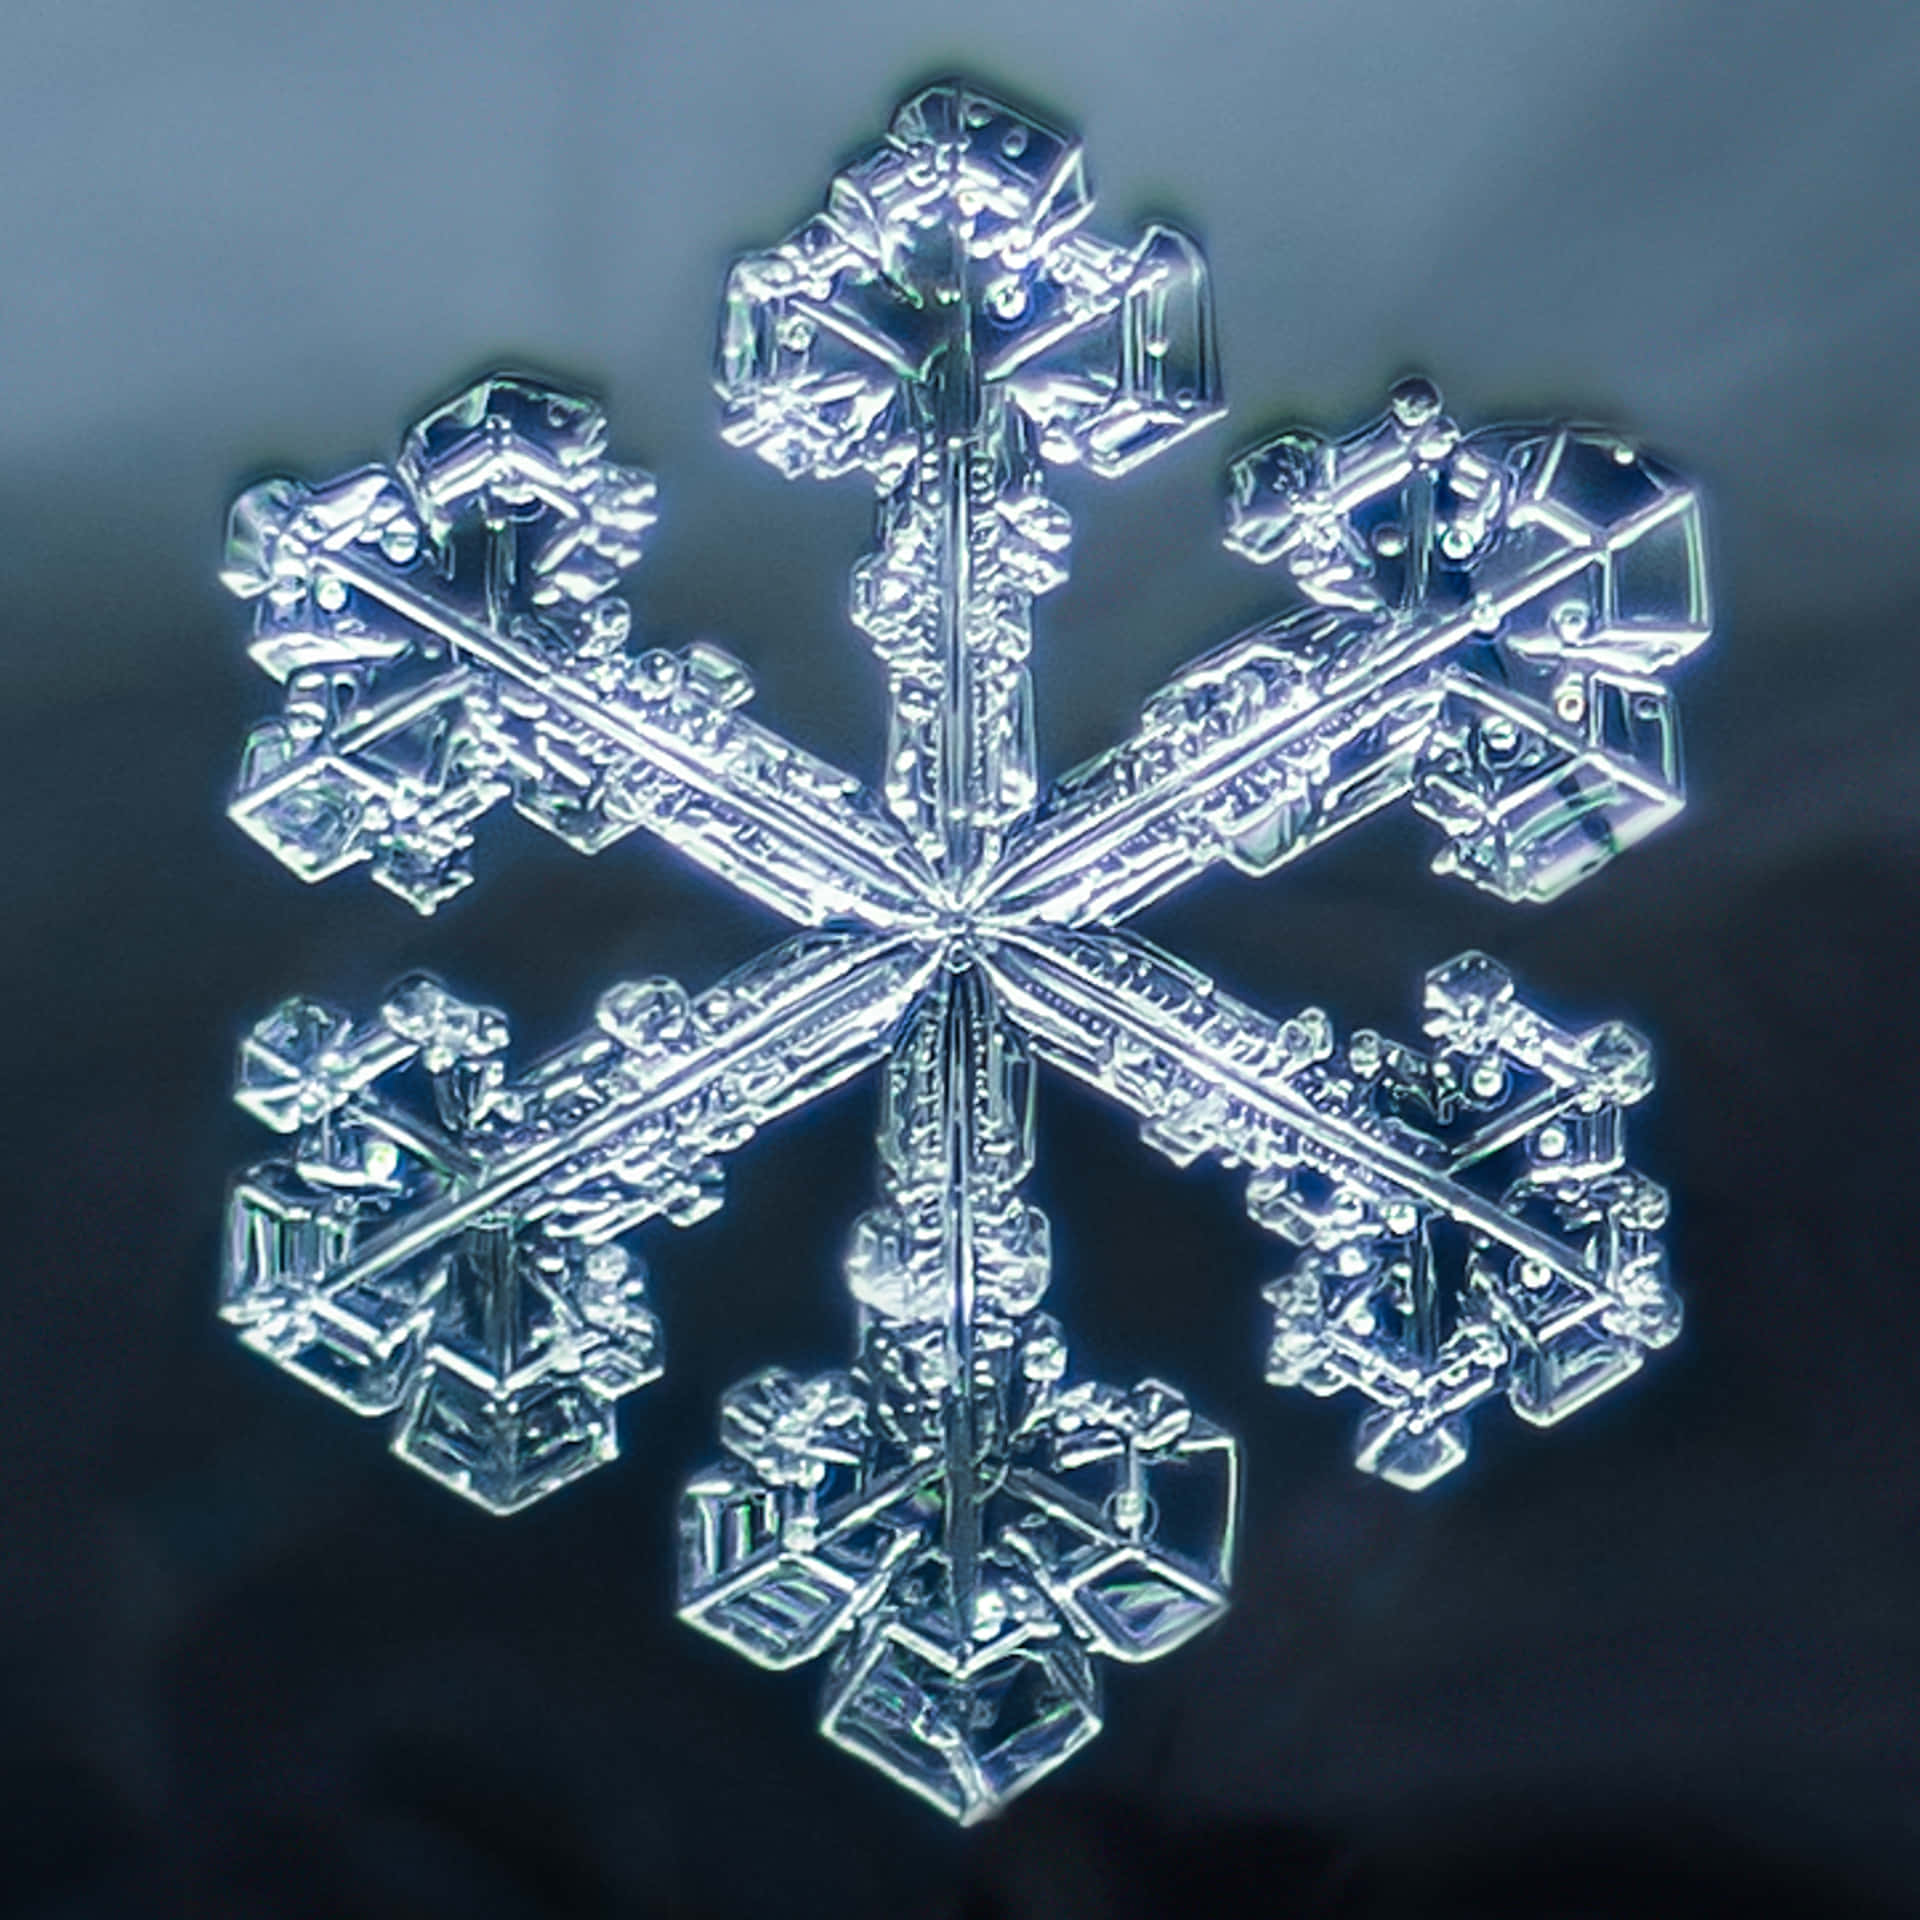 A crystal-clear snowflake catching the light in its intricate design